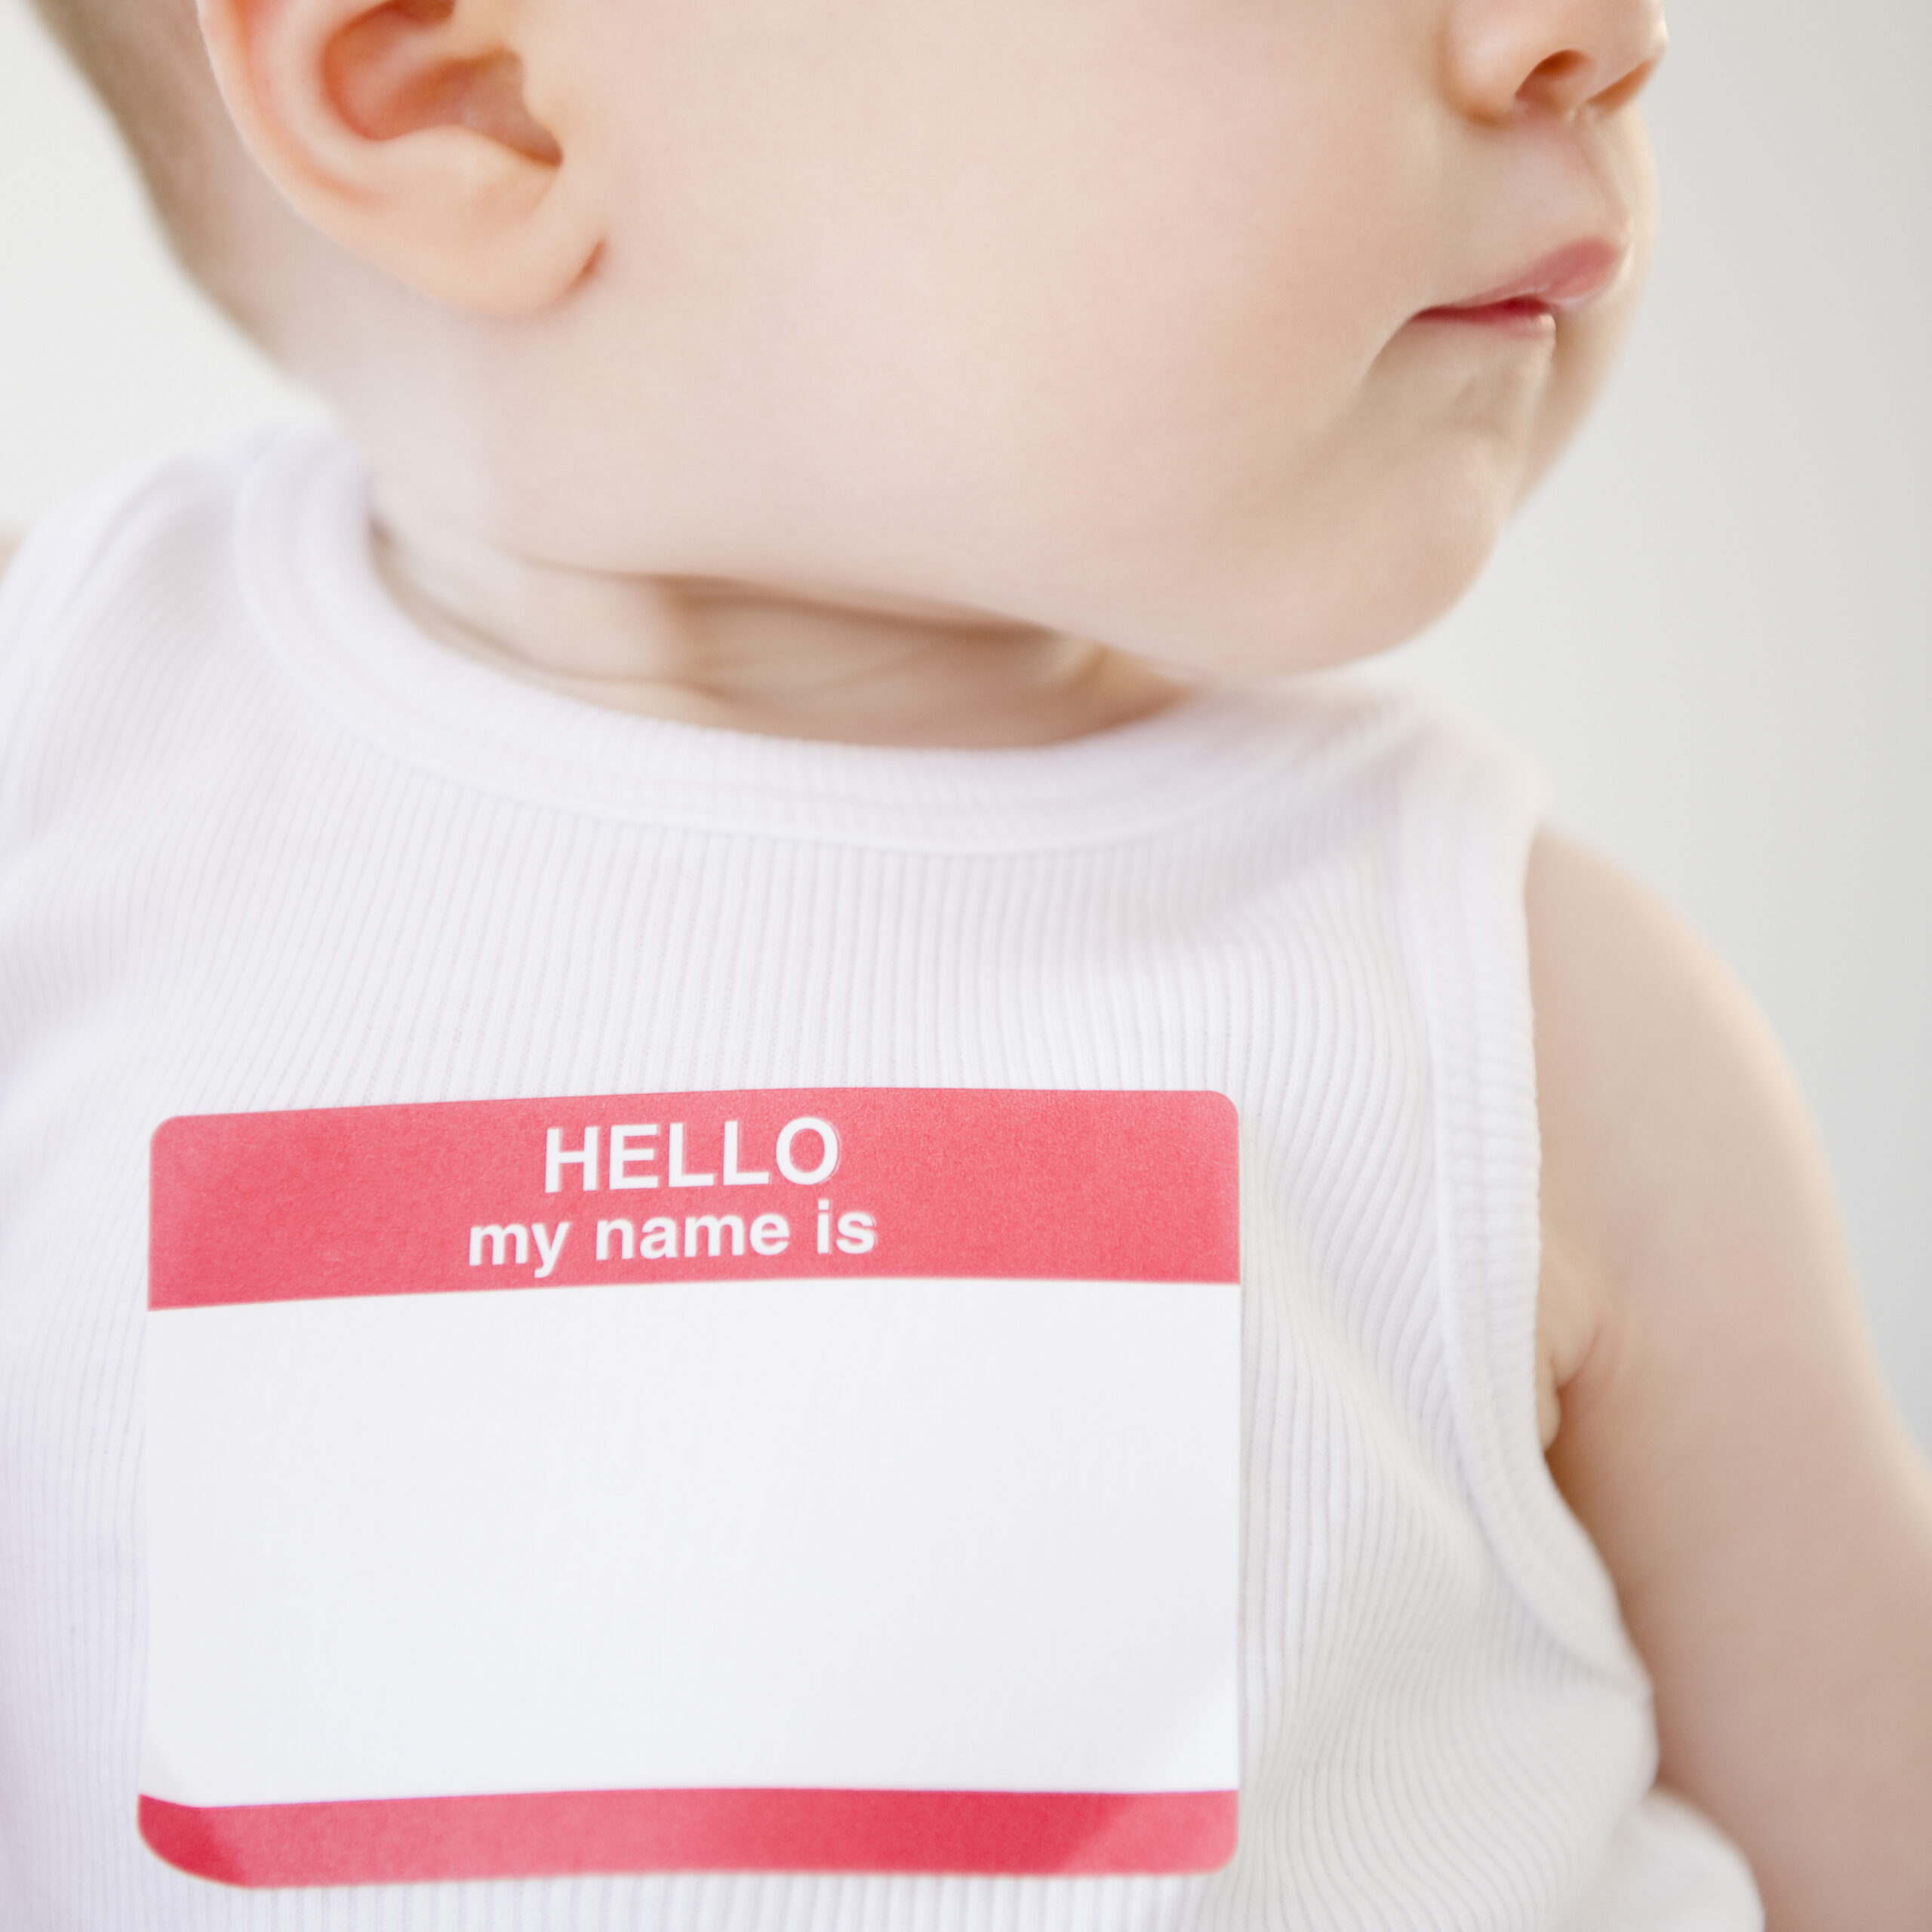 What happens when you hate your baby’s name?